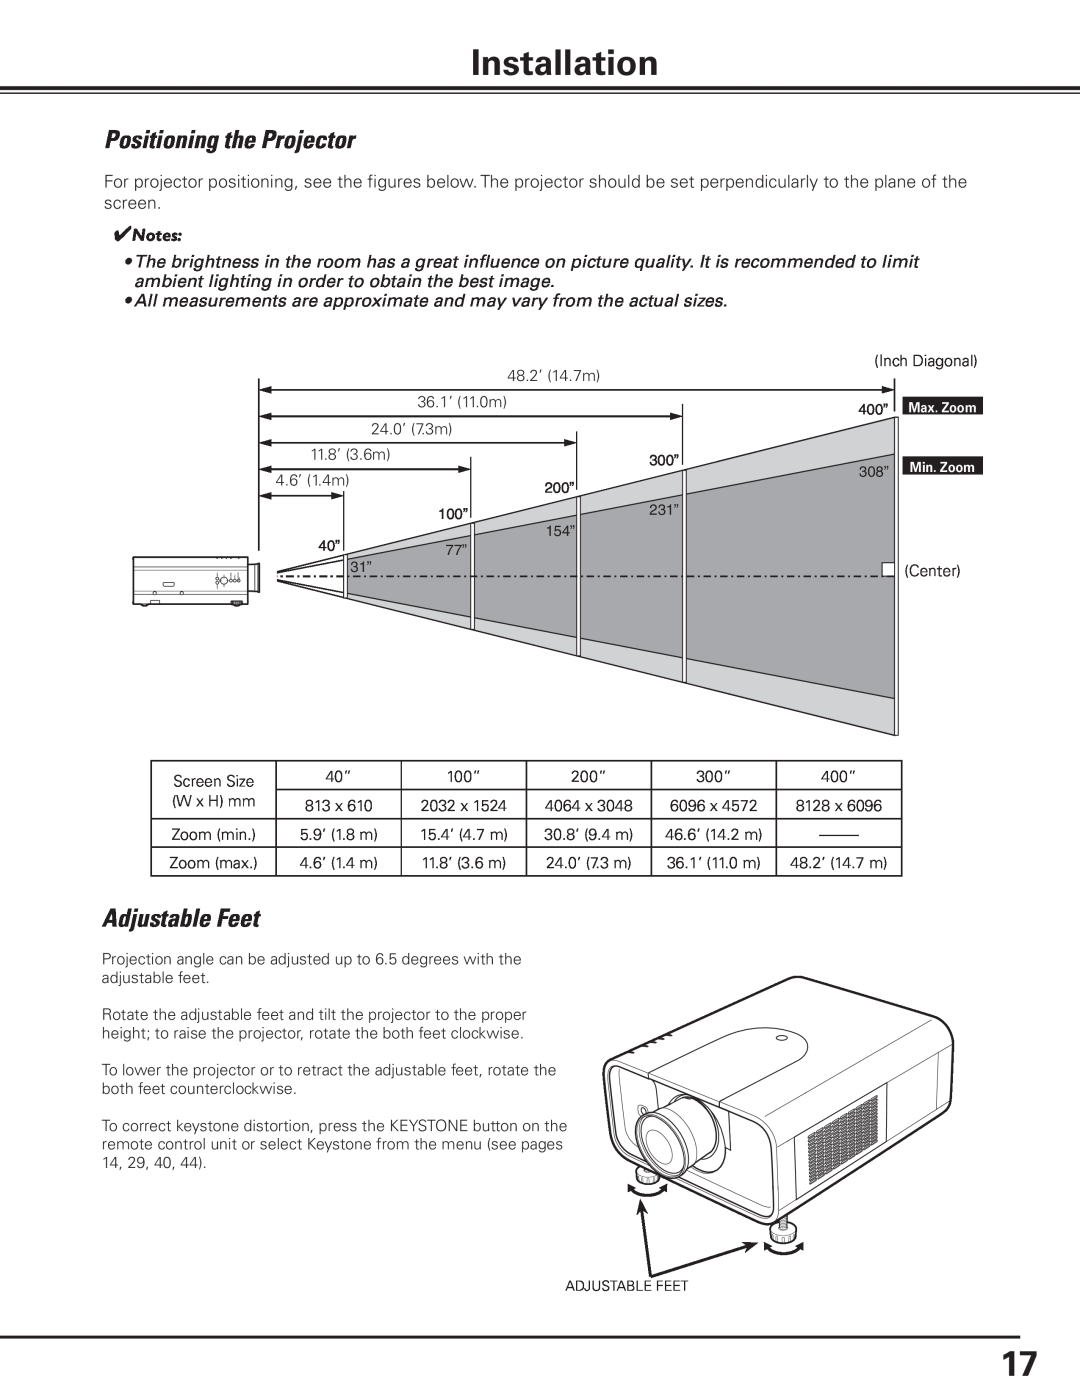 Canon 7585 manual Installation, Positioning the Projector, Adjustable Feet, Notes 